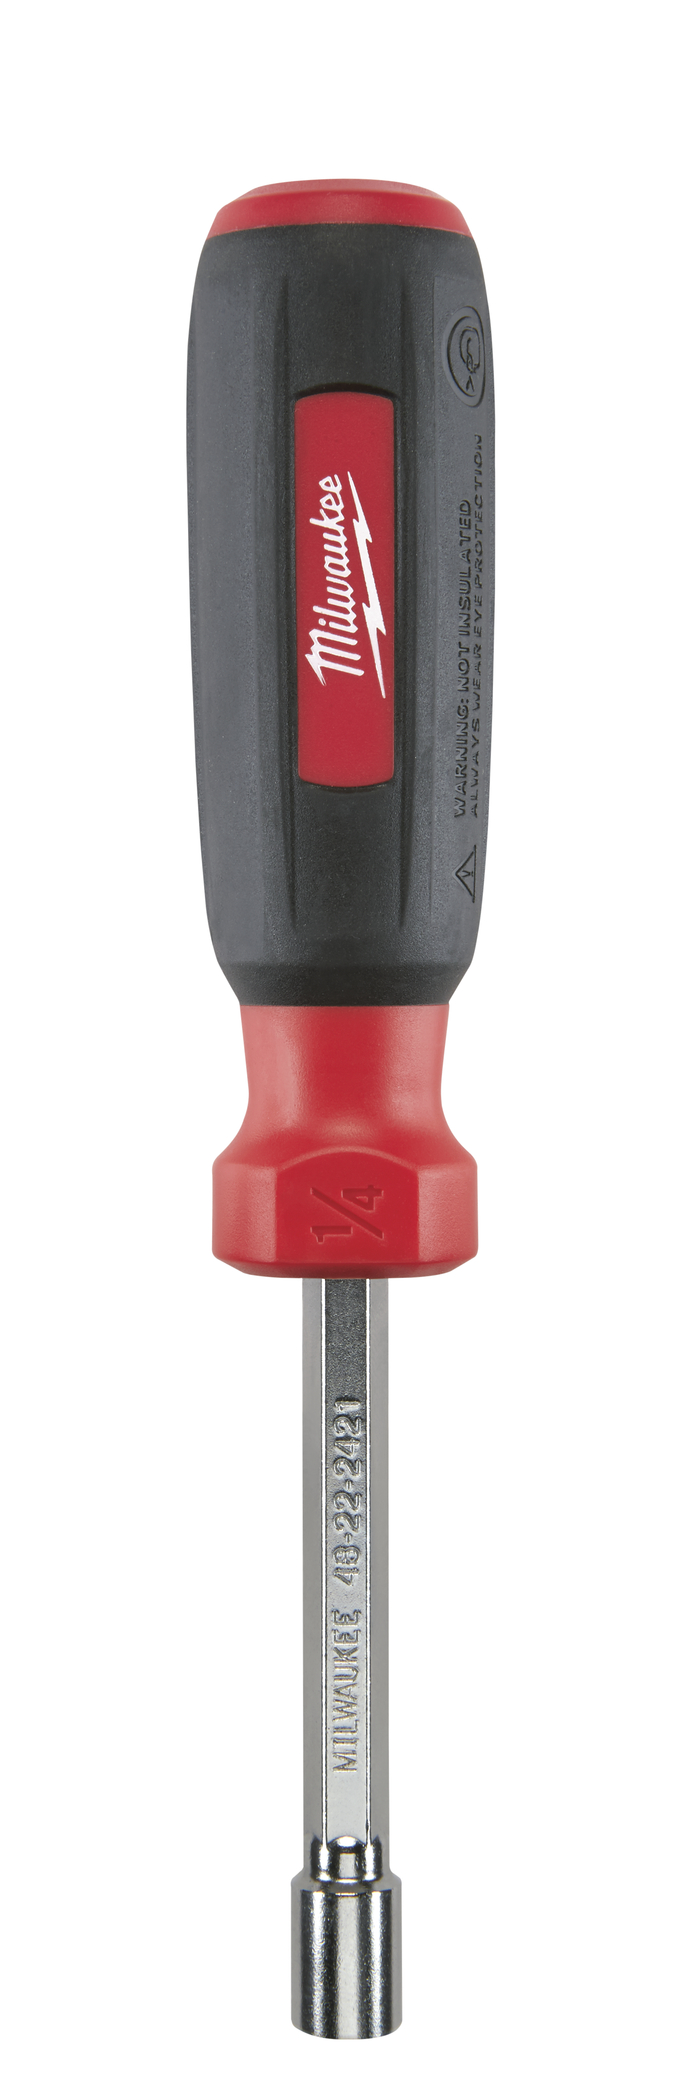 1/4 in. Hollow Shaft Nut Driver